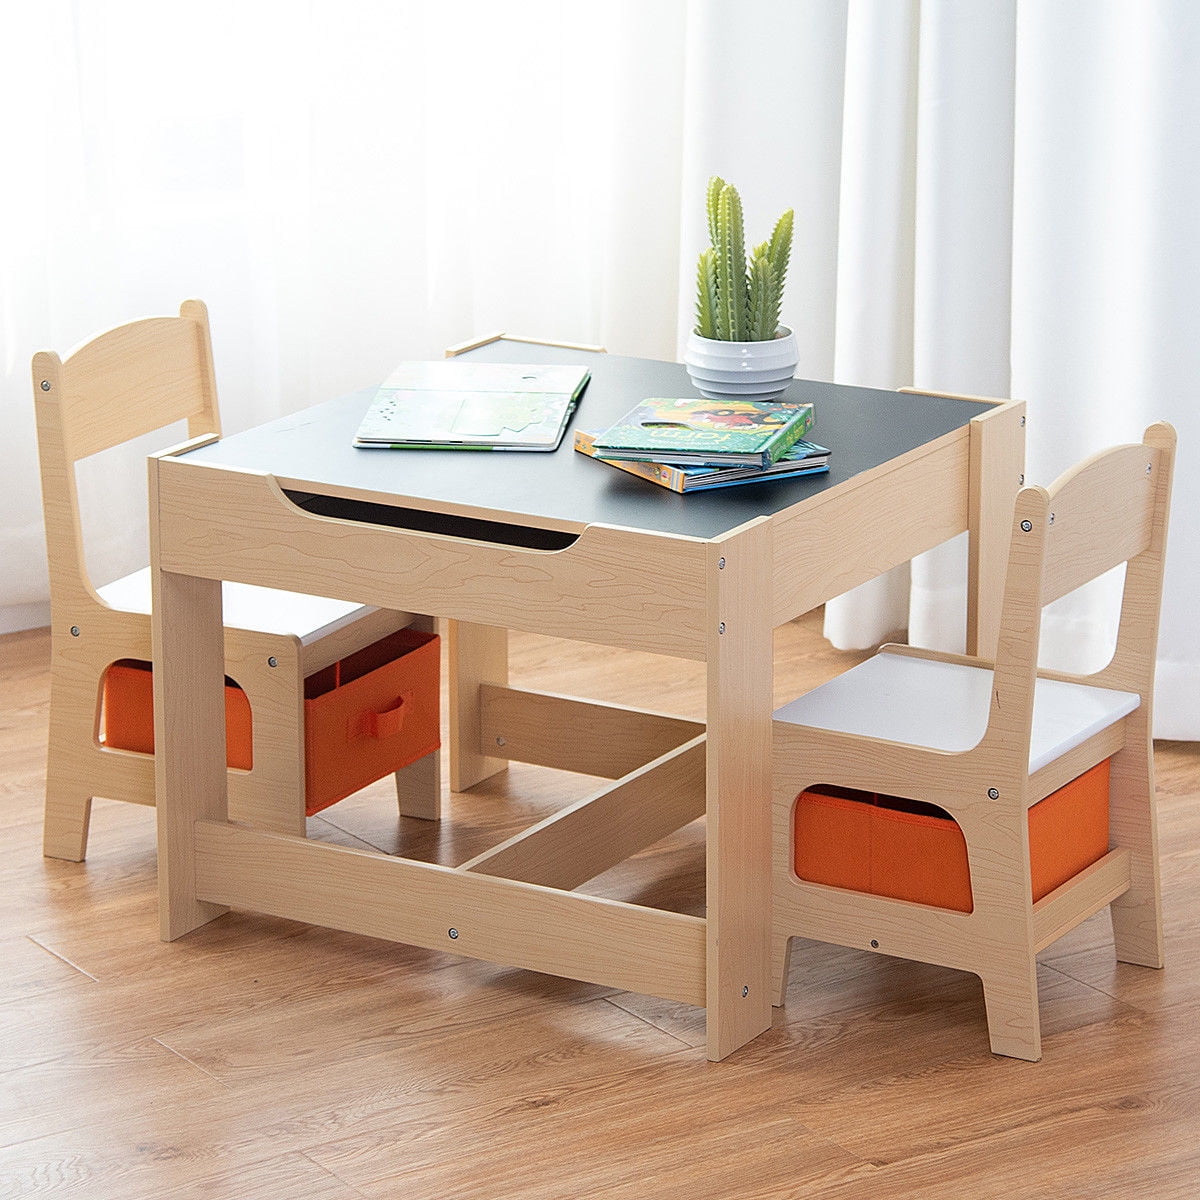 Gymax Children Kids Table Chairs Set 